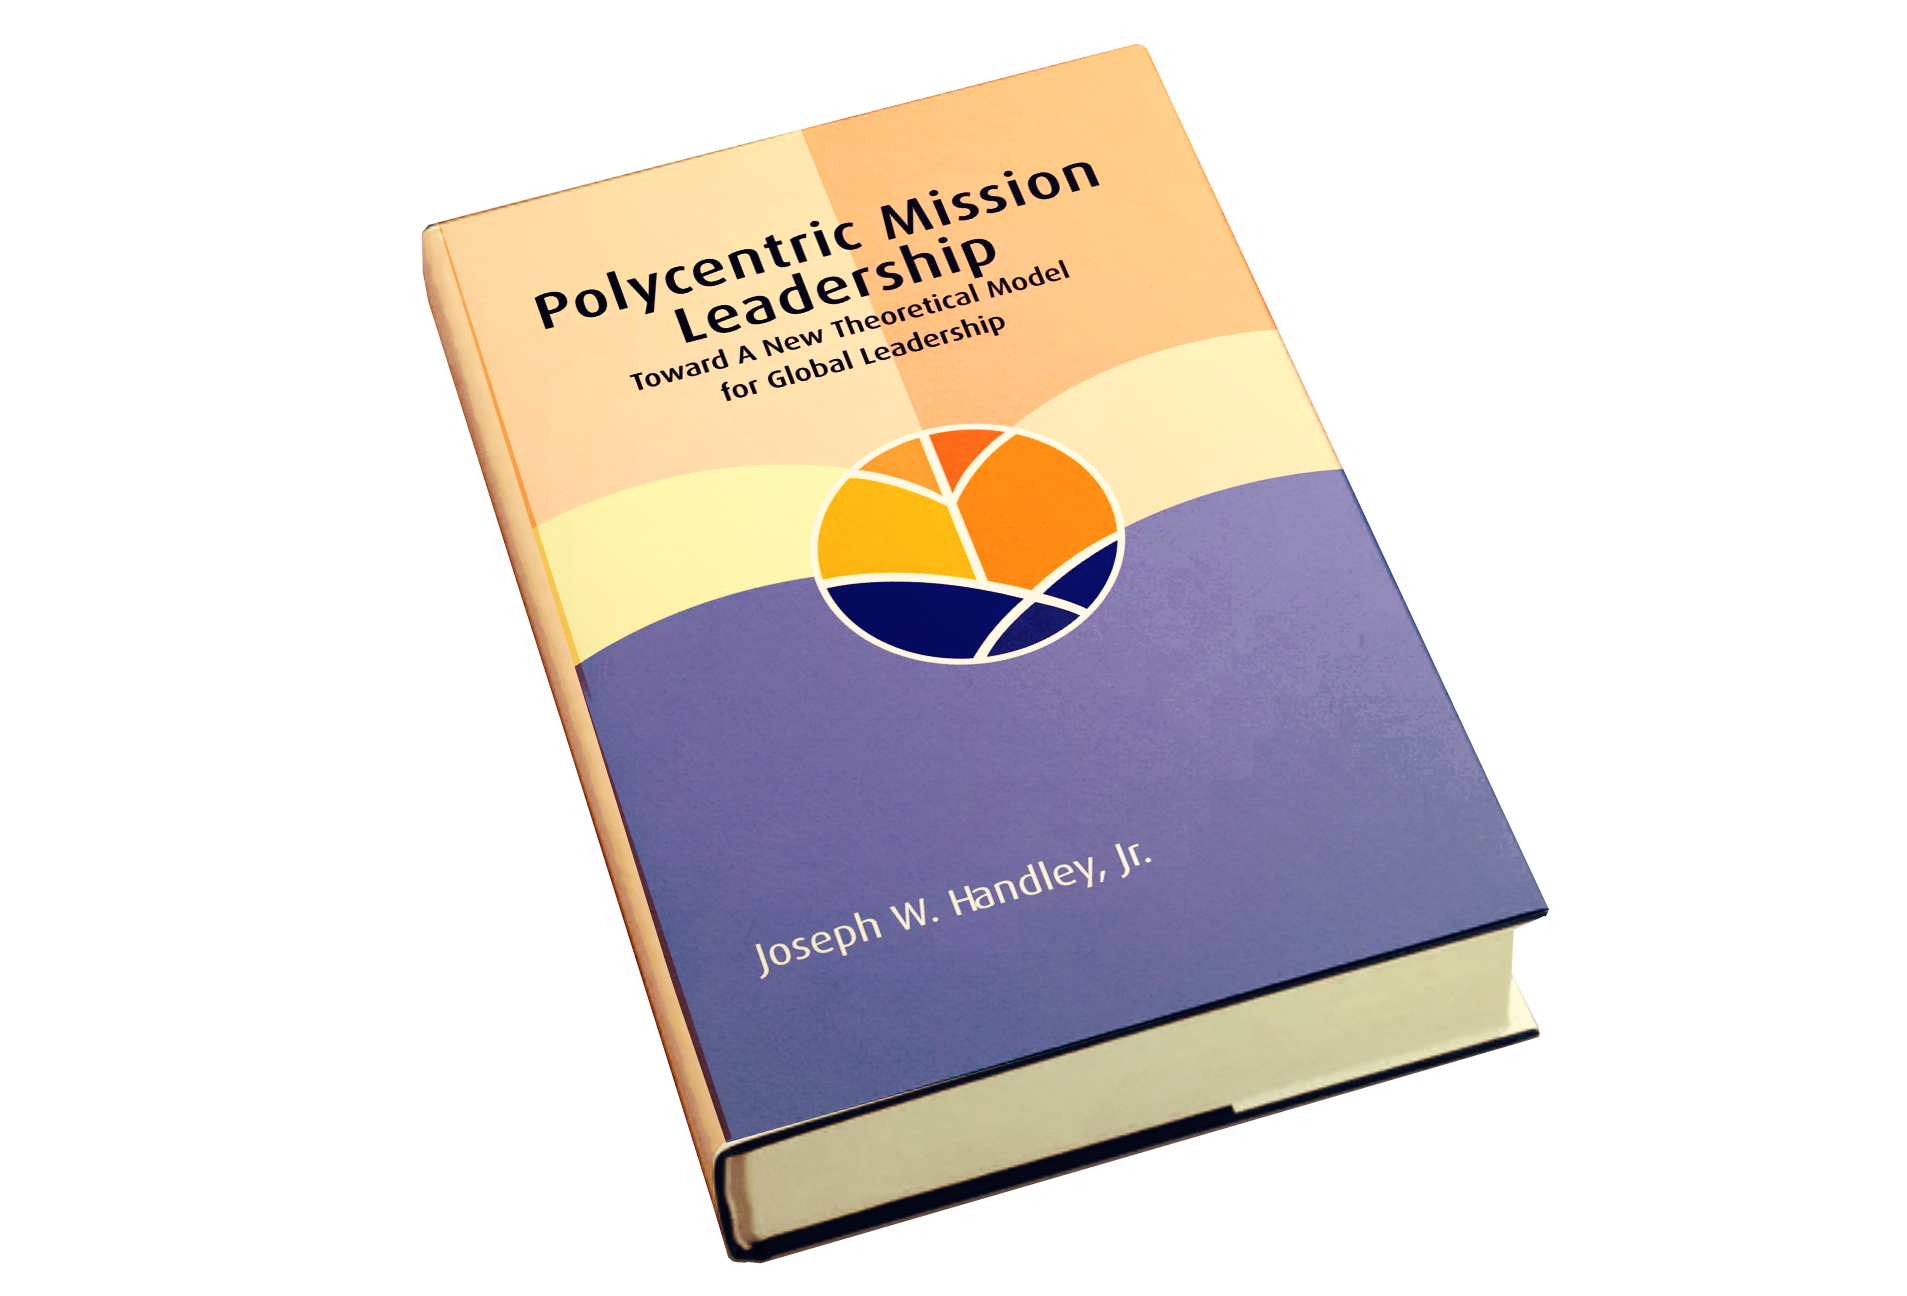 Polycentric Mission Leadership